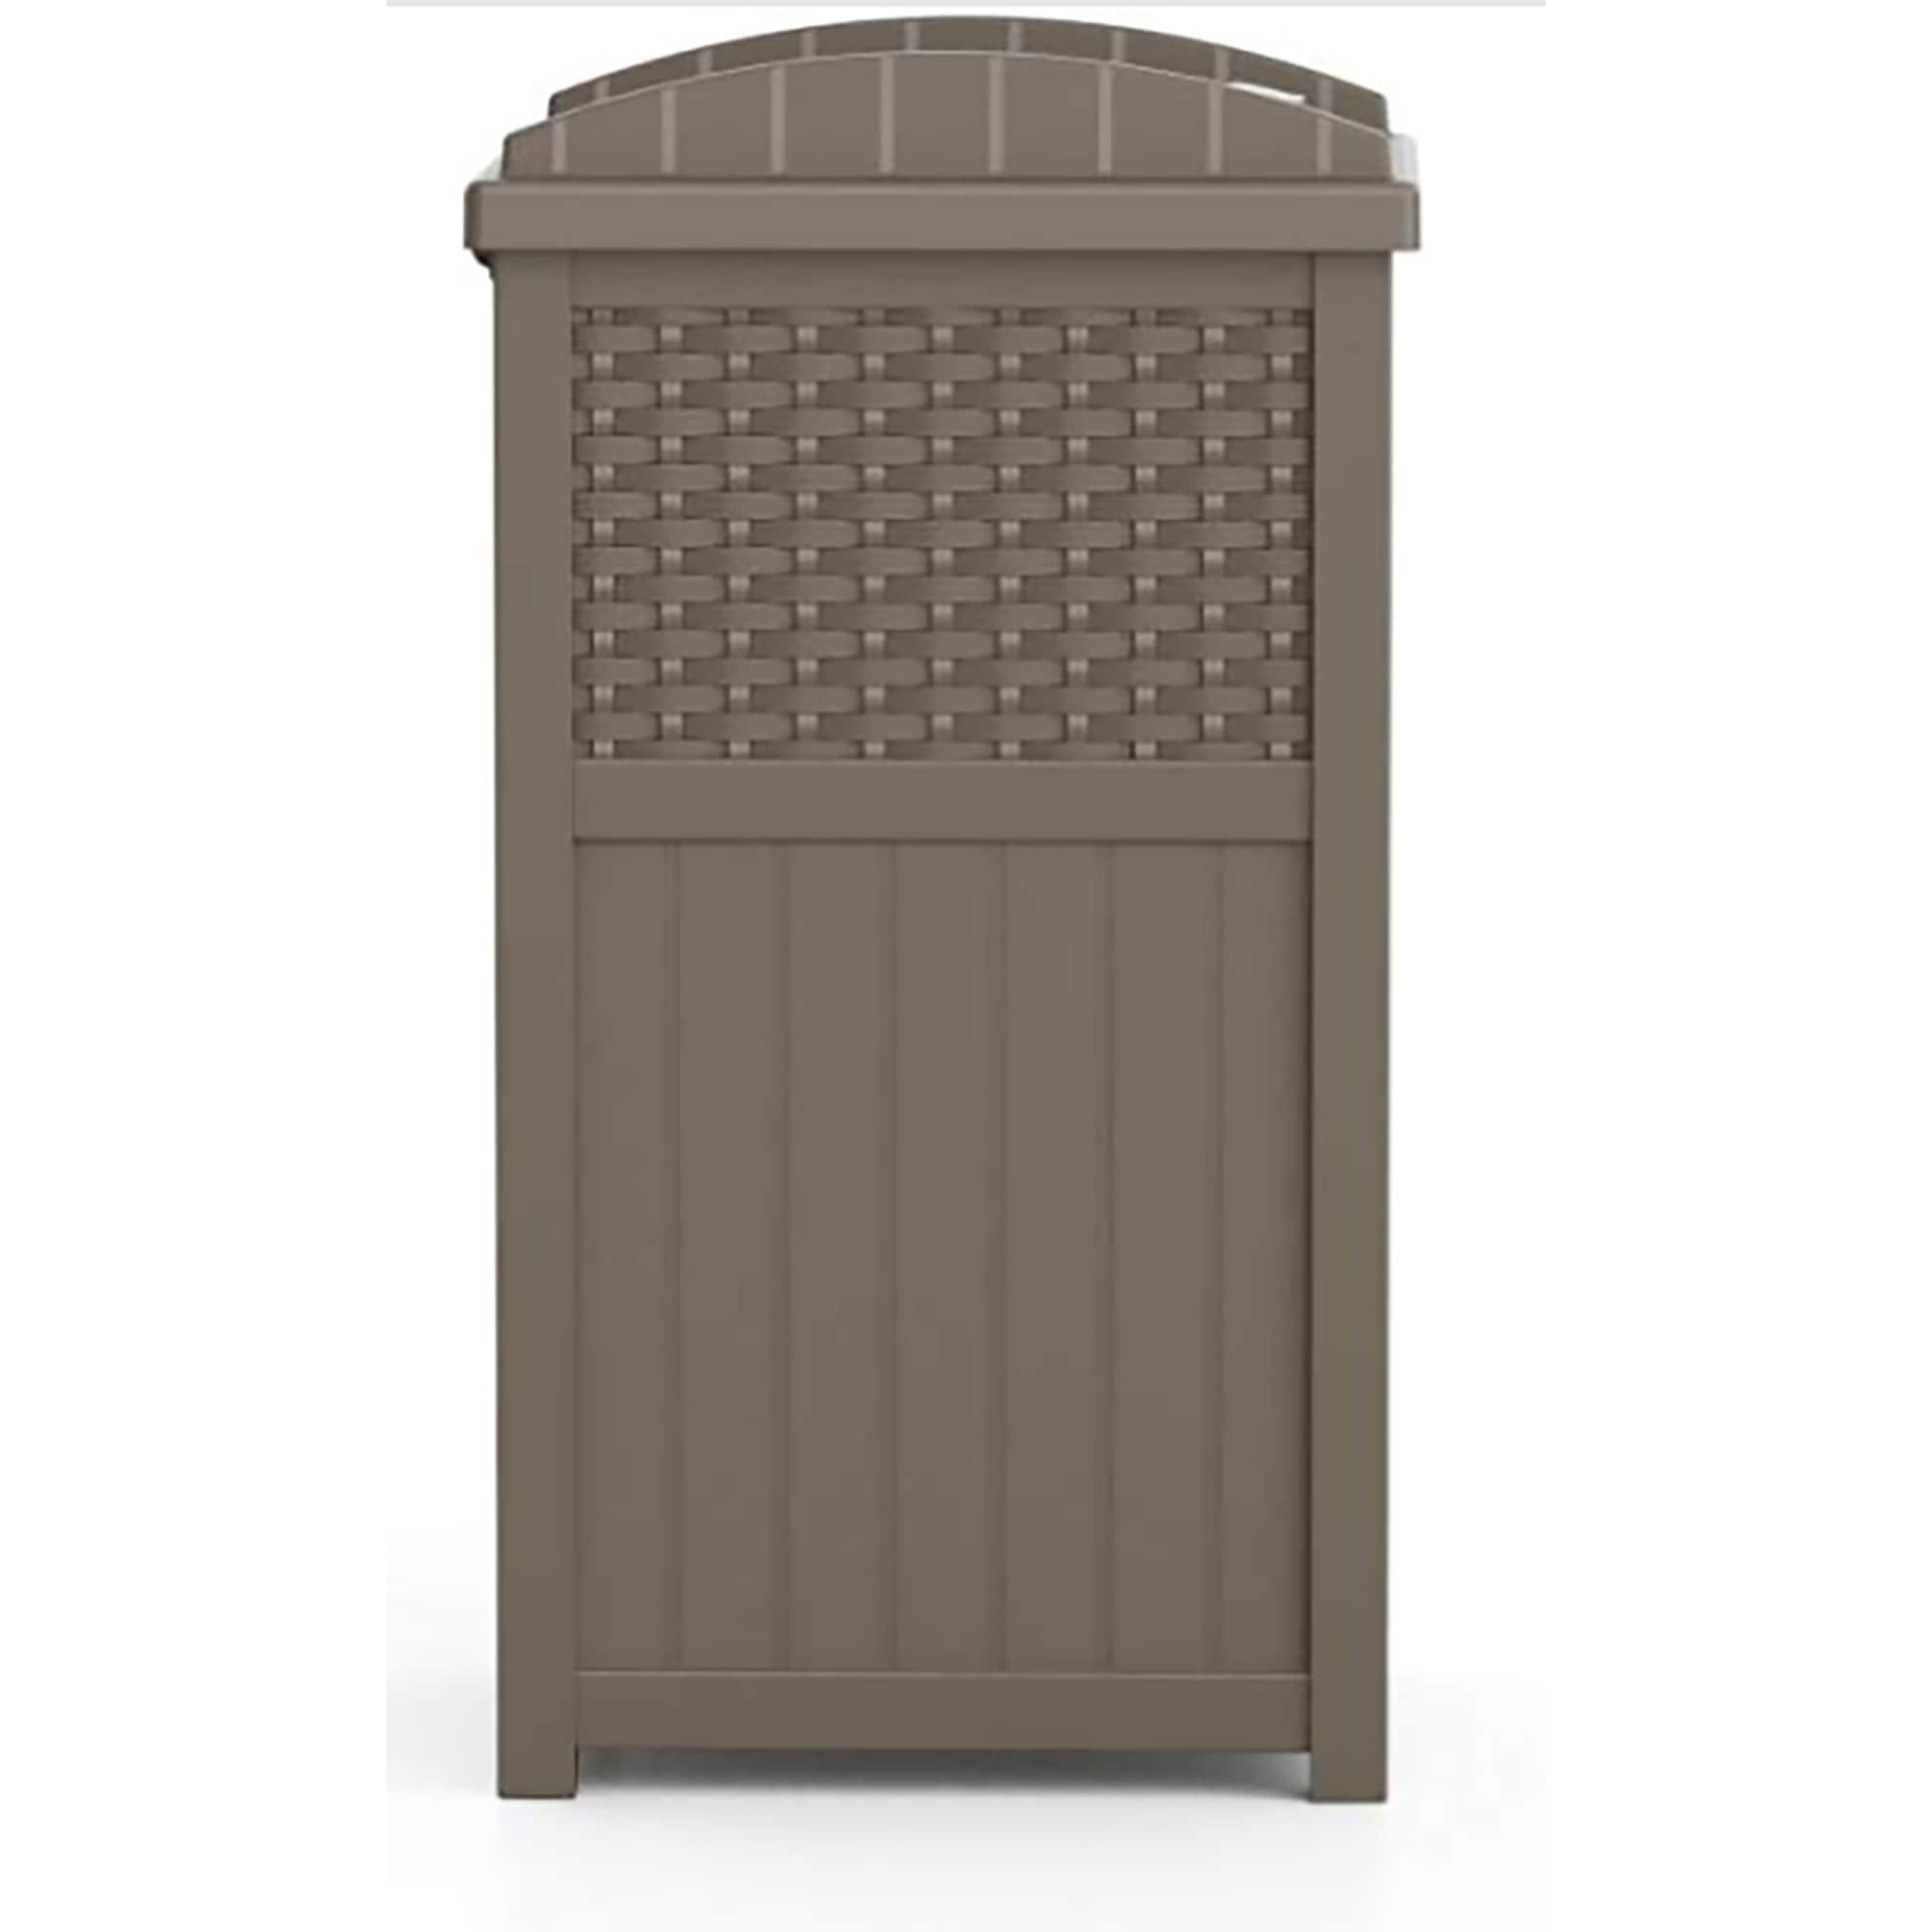 https://ak1.ostkcdn.com/images/products/is/images/direct/801cded5cab561ed8852d10dc7ebdf7ae2511f58/Suncast-Wicker-Resin-Outdoor-Hideaway-Trash-Can-with-Latching-Lid%2C-Dark-Taupe.jpg